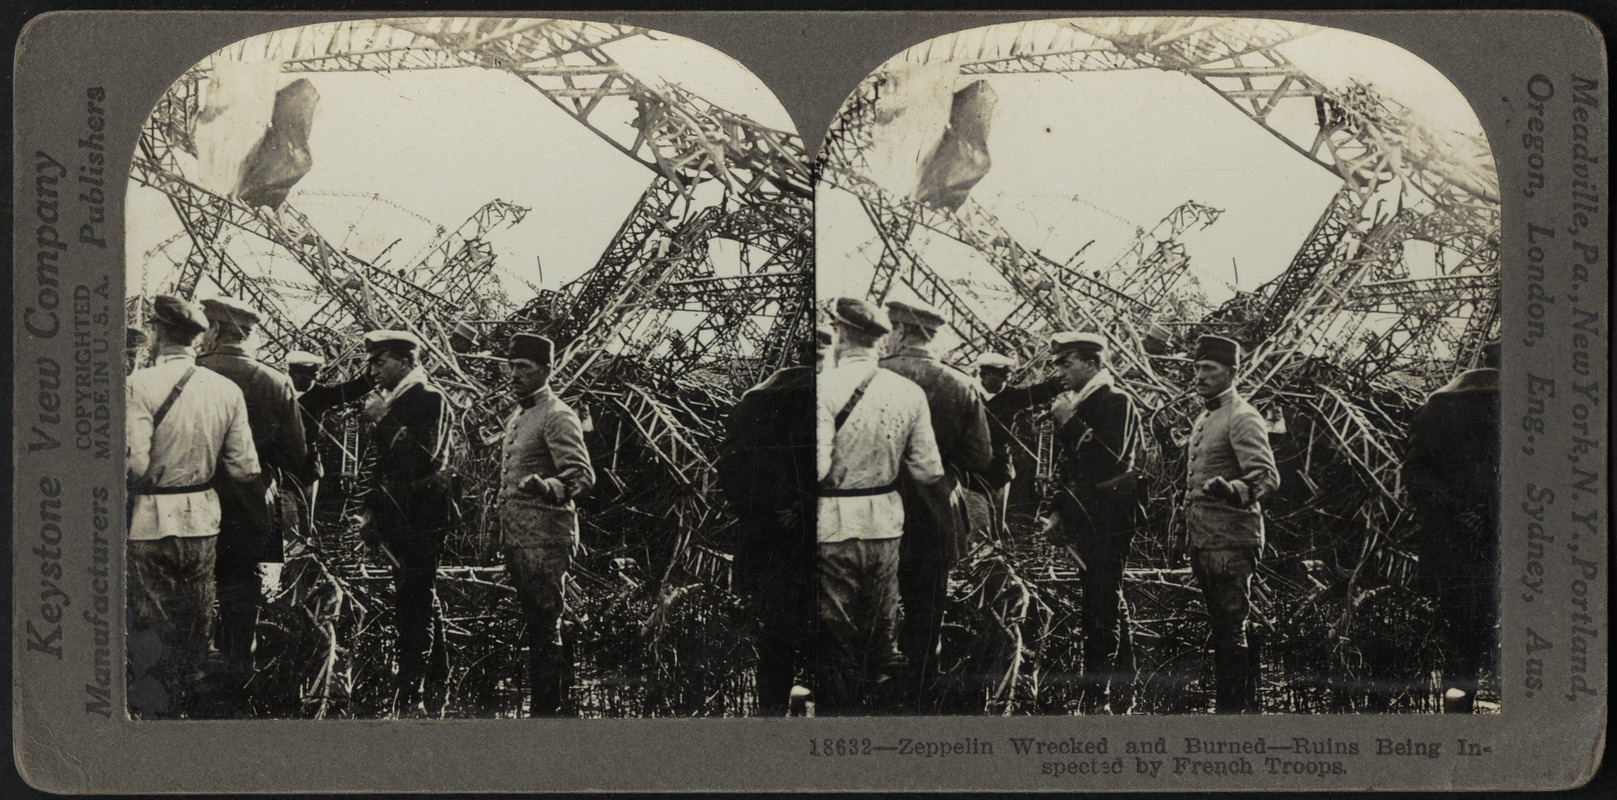 French troops inspecting a wrecked zeppelin